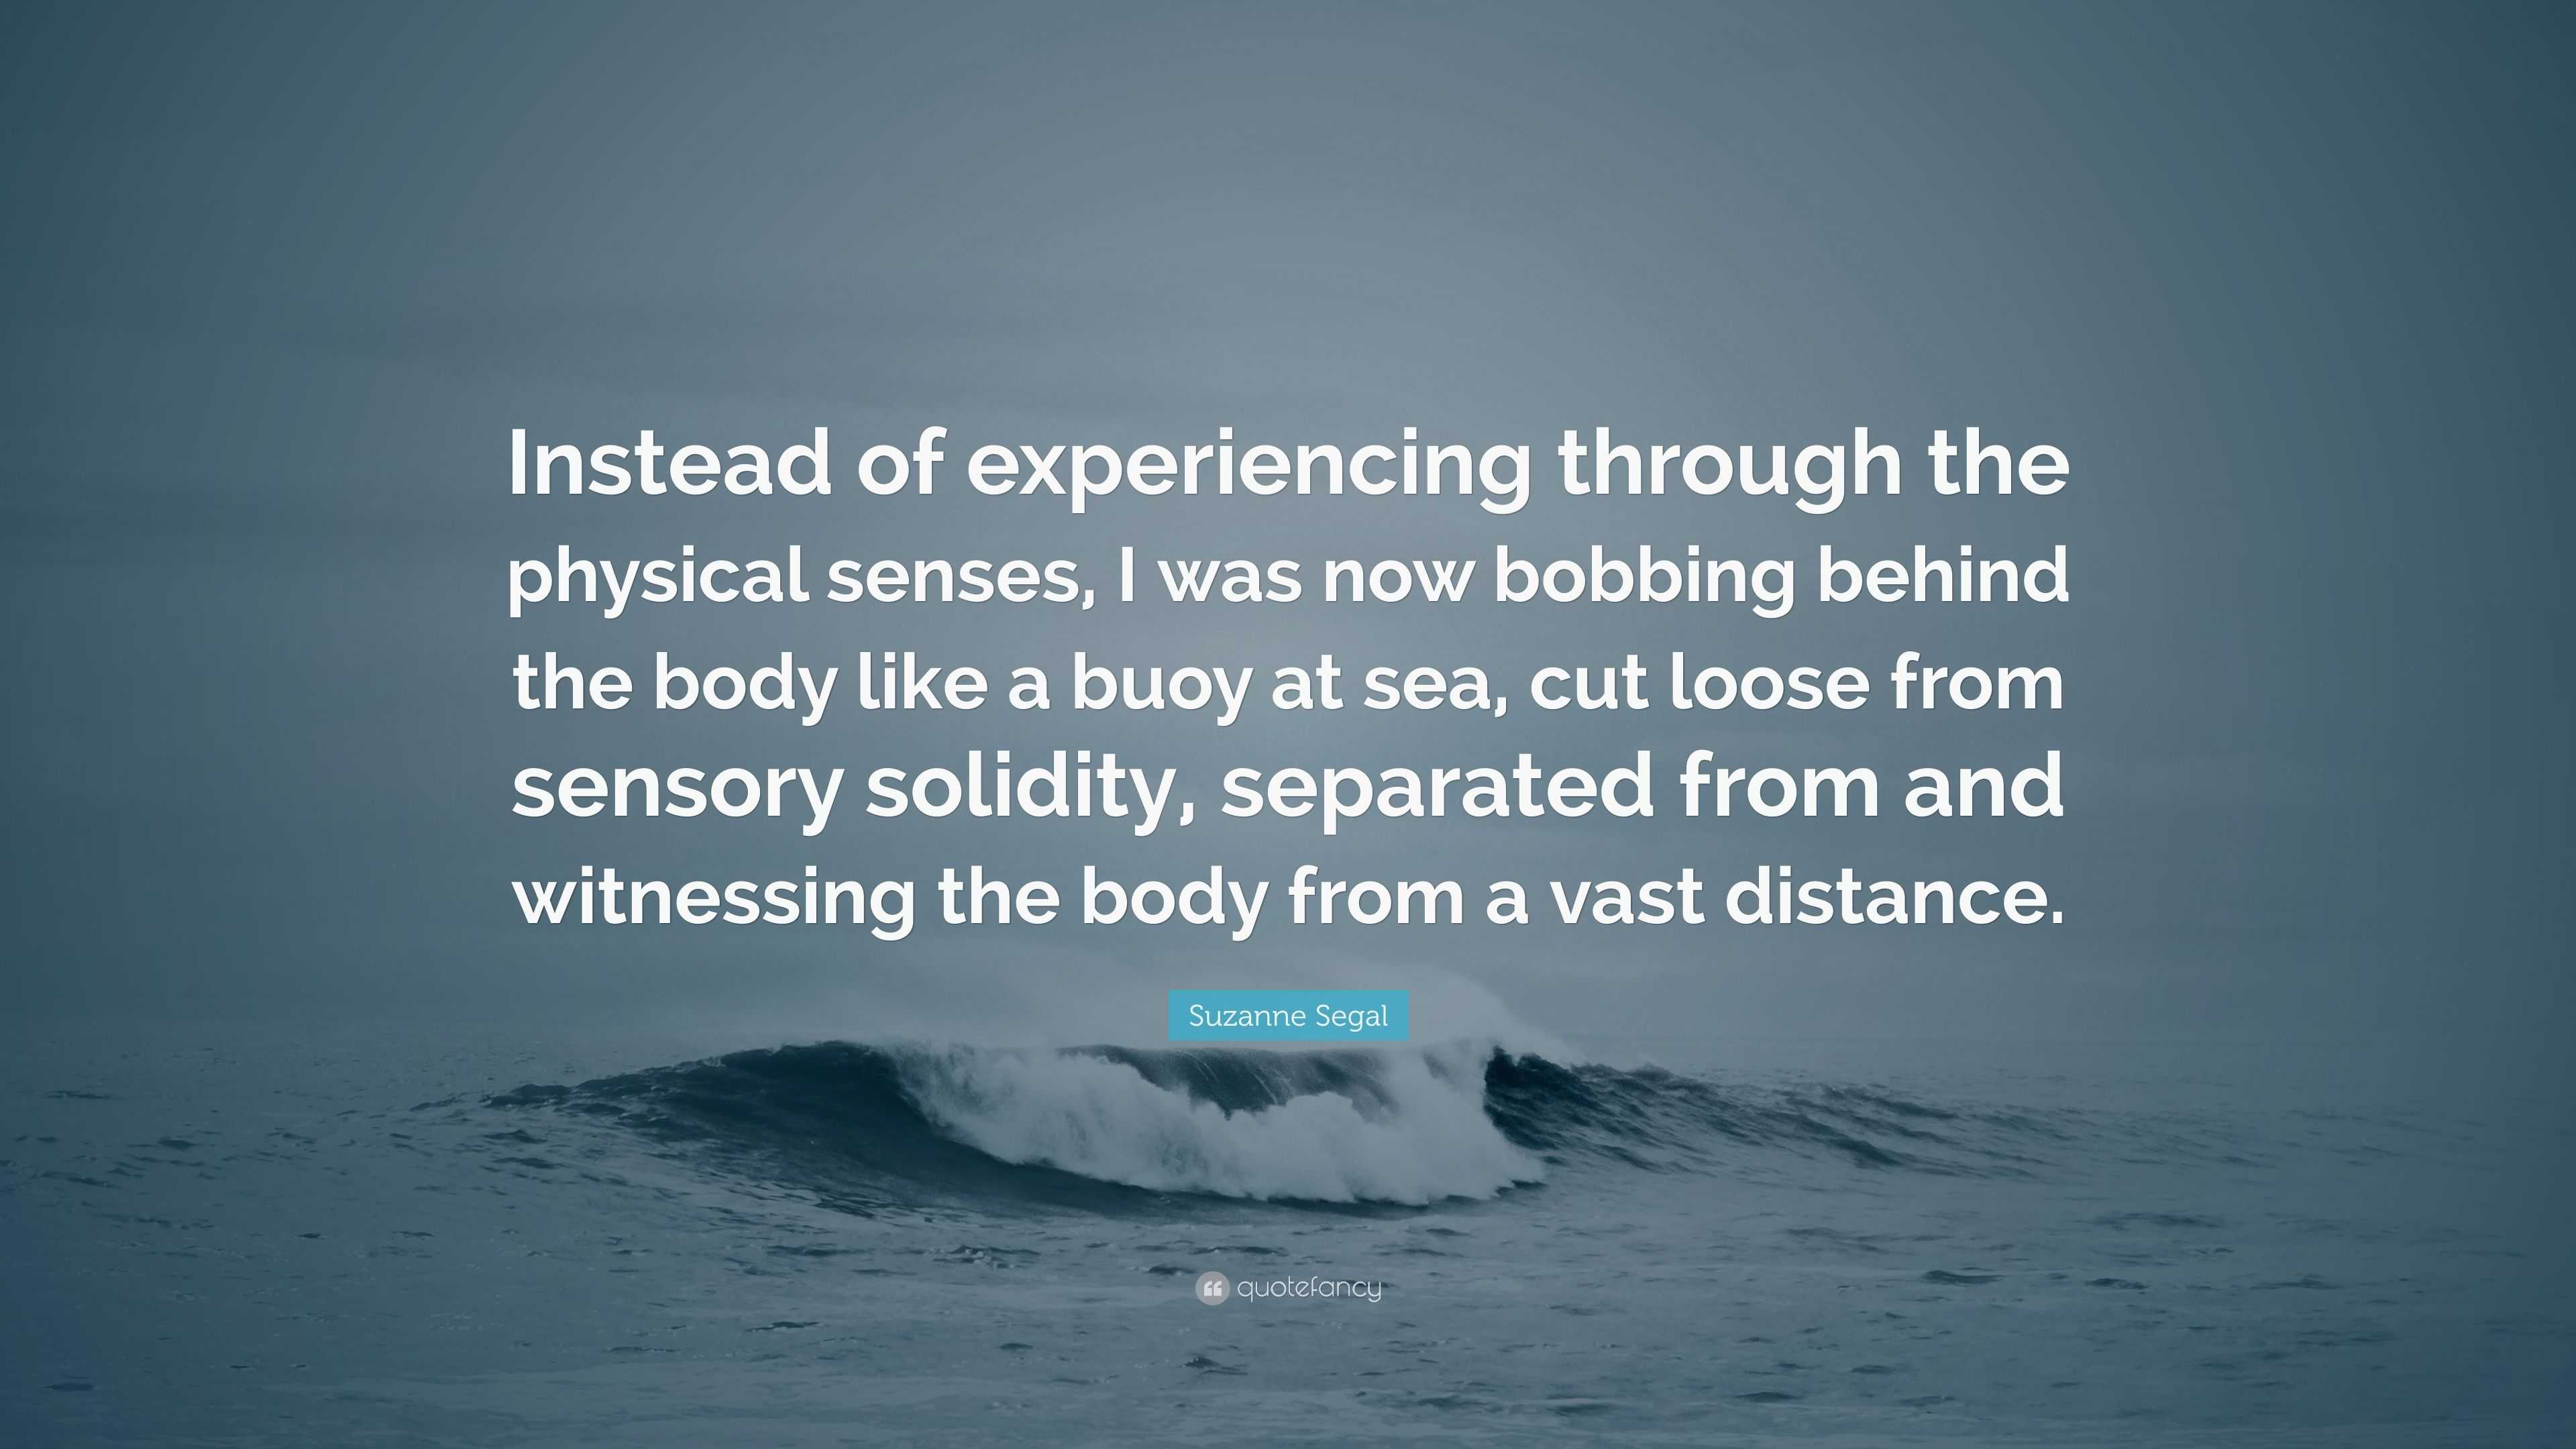 Suzanne Segal Quote: “Instead of experiencing through the physical ...